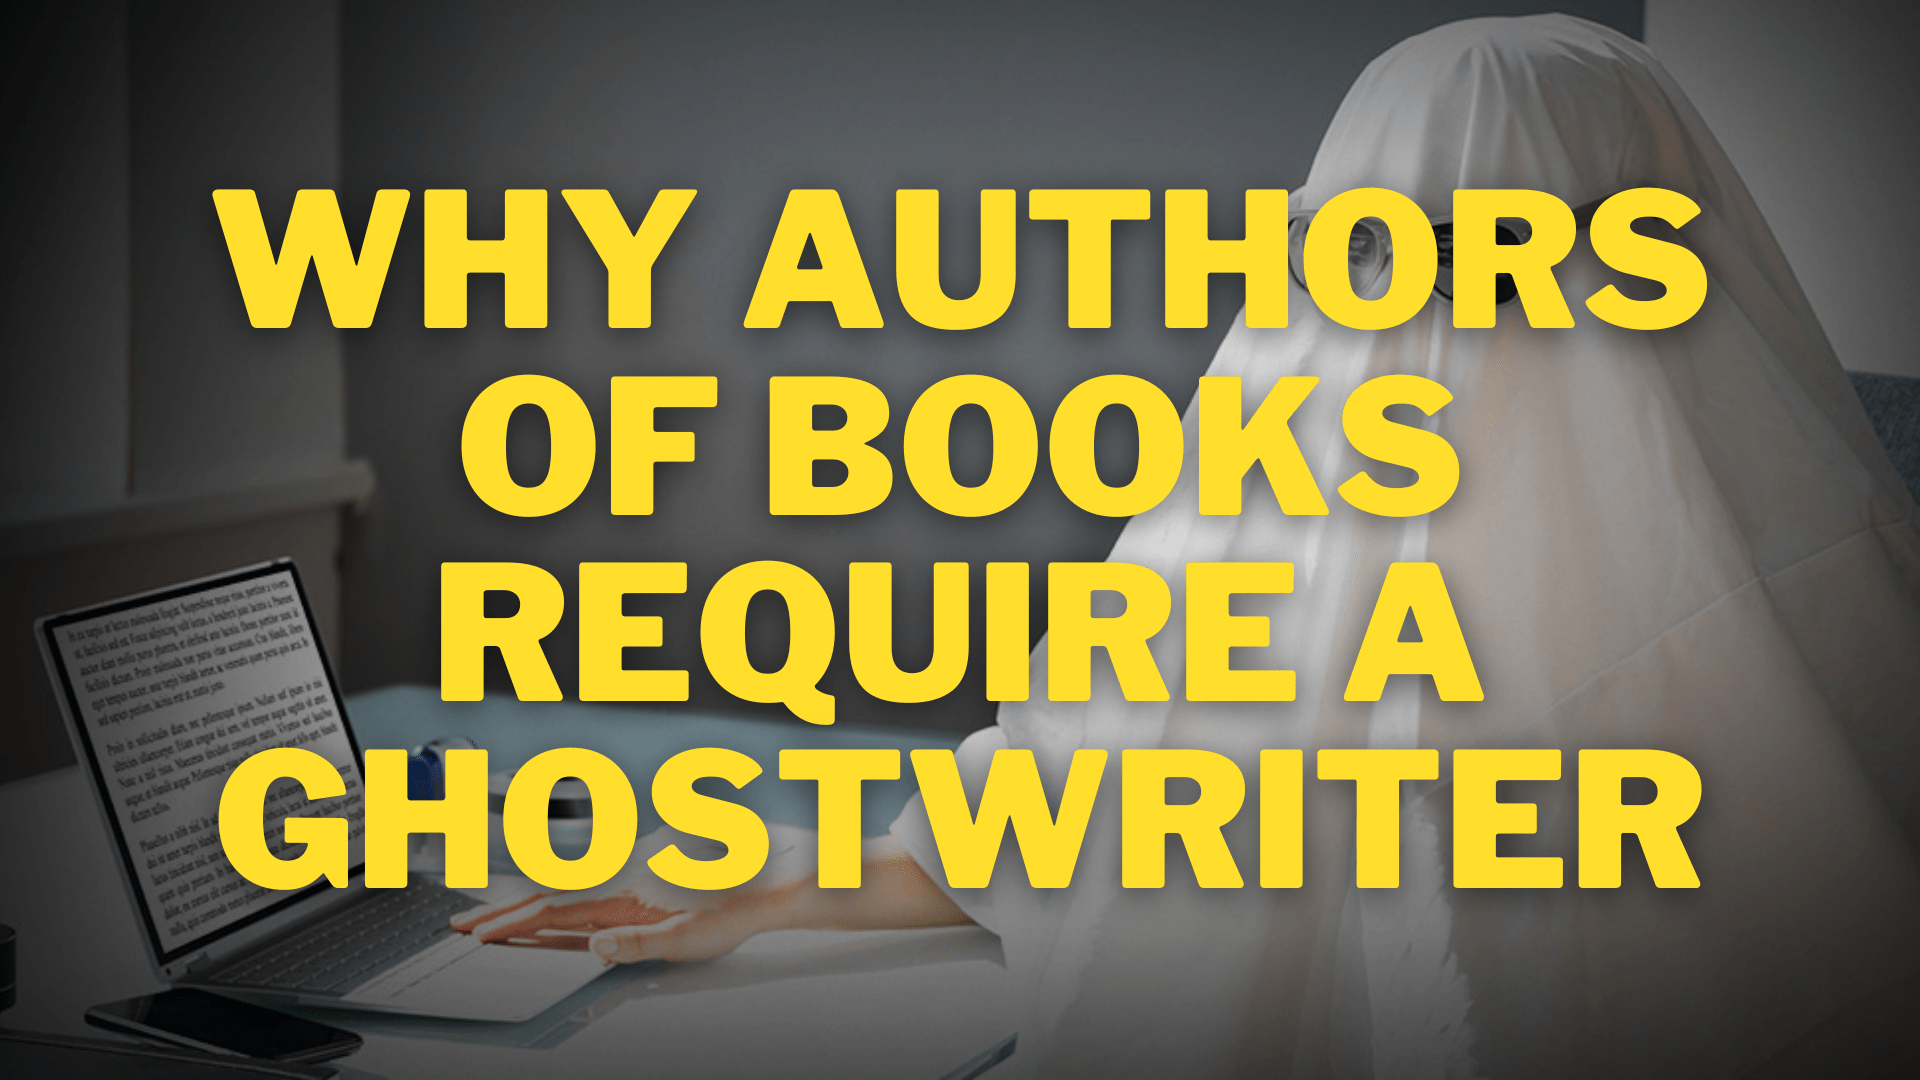 Why Authors of Books Require a Ghostwriter